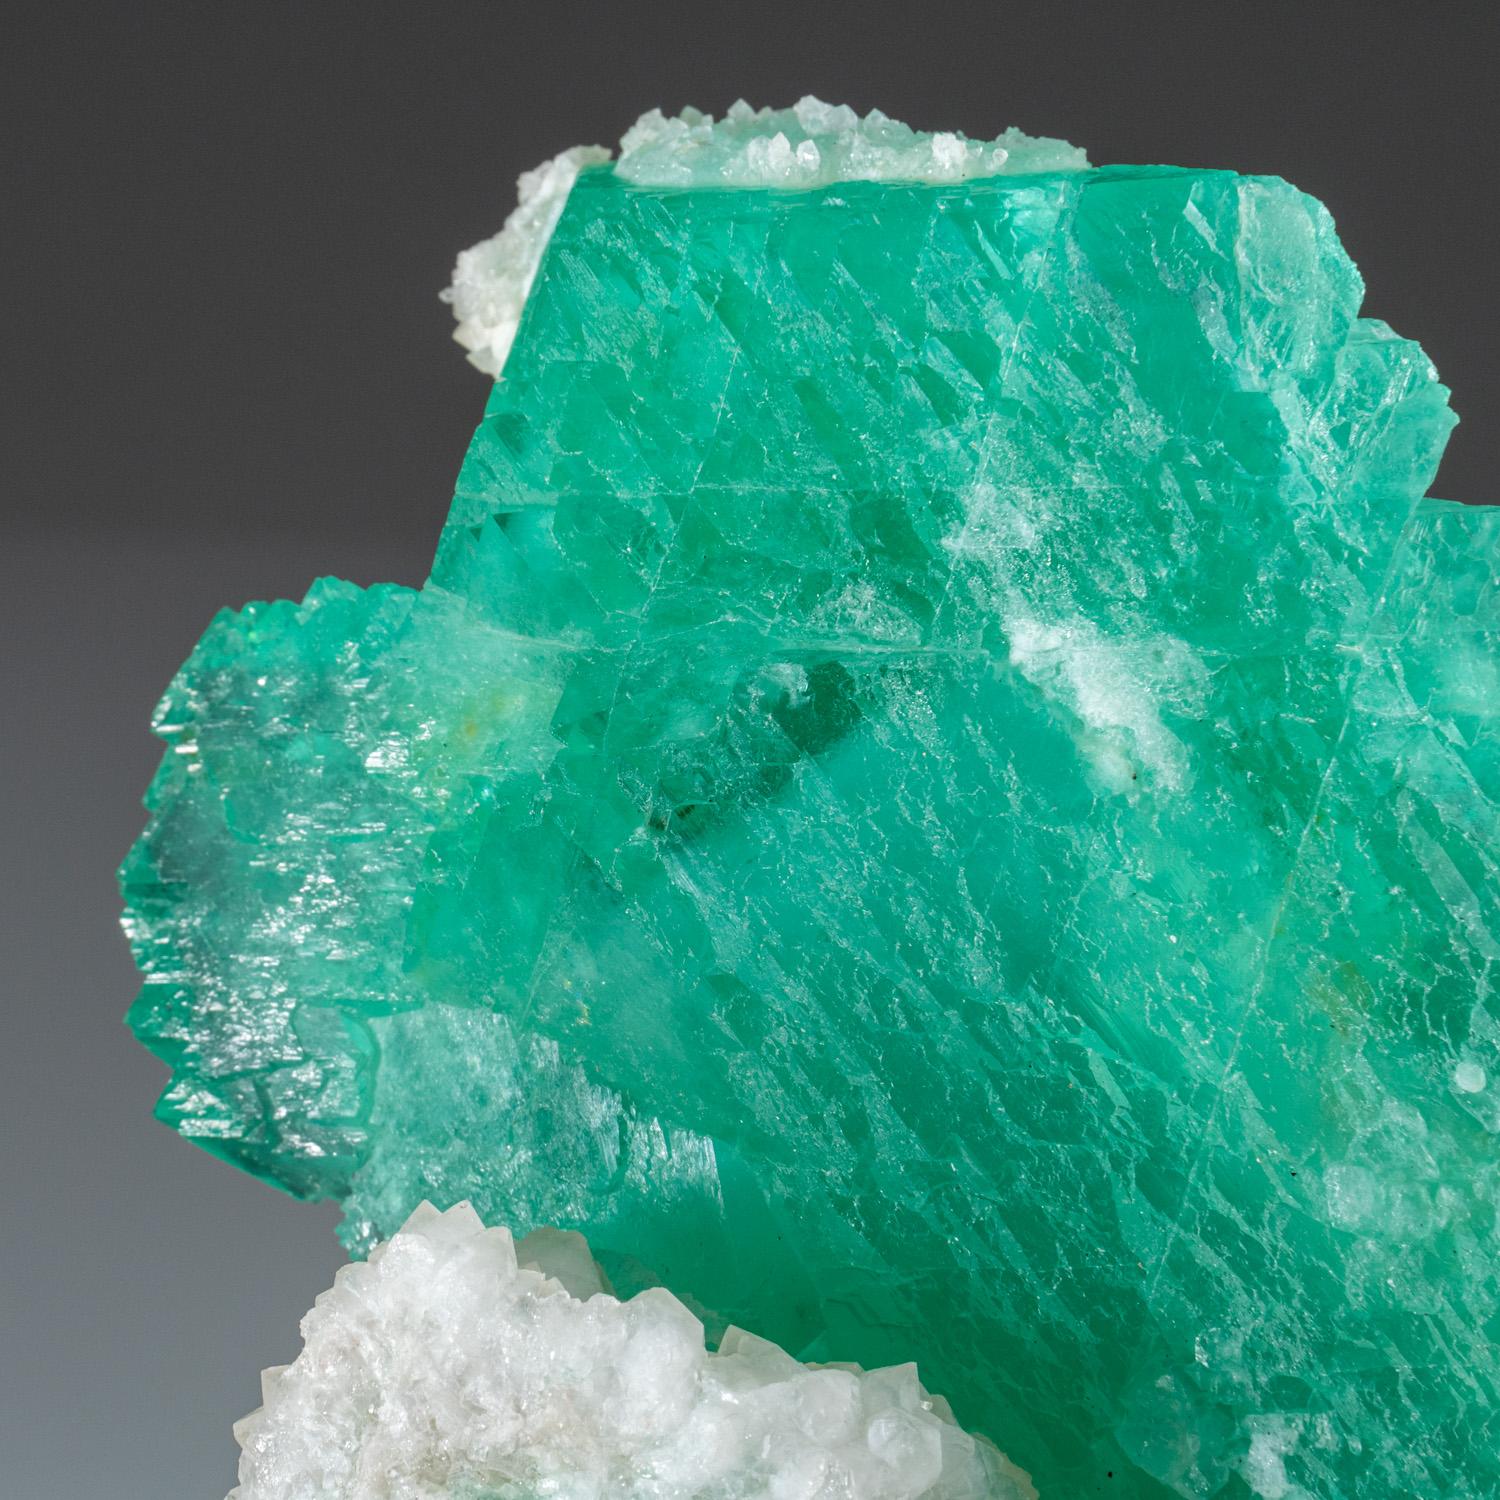 From Yaogangxian Mine, Nanling Mountains, Hunan Province, China  

Exceptionally large lustrous crystal of emerald green transparent fluorite with with colorless quartz crystals. The fluorite crystal with glassy crystal faces.

 

Weight: 1.75 lbs,